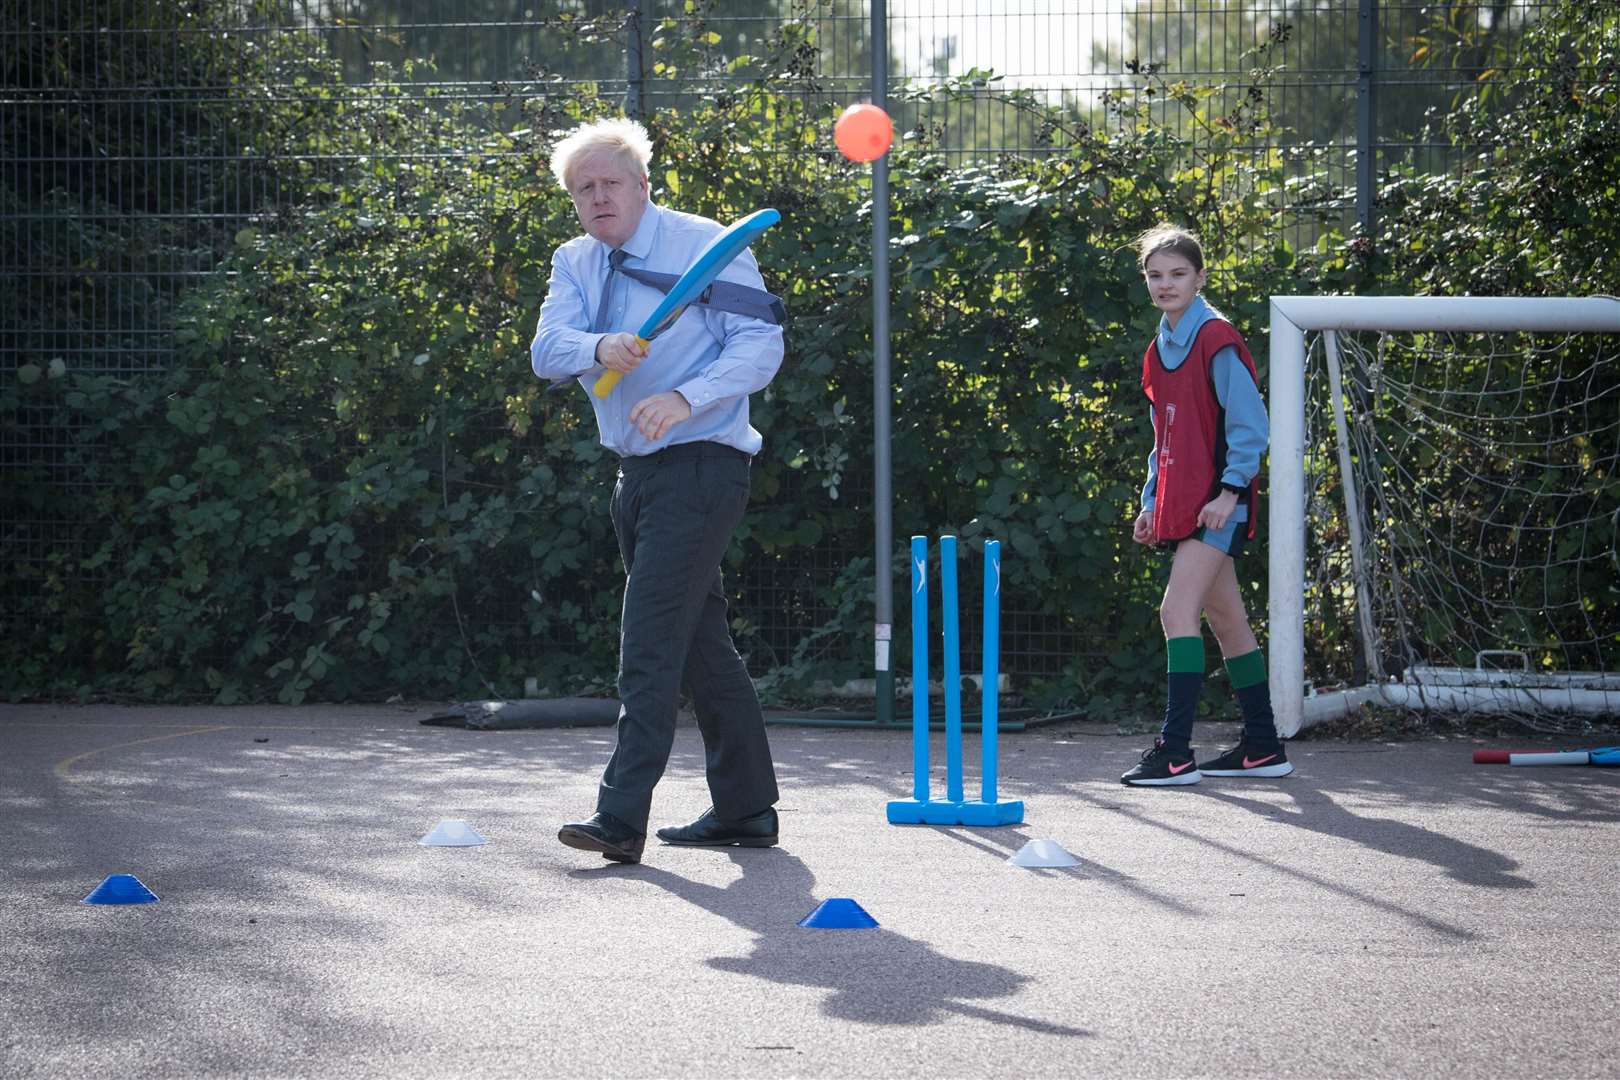 Taking a turn with both bat and ball, Mr Johnson showed his fitness levels are improving after his bout of Covid-19 earlier in the year (Stefan Rousseau/PA)